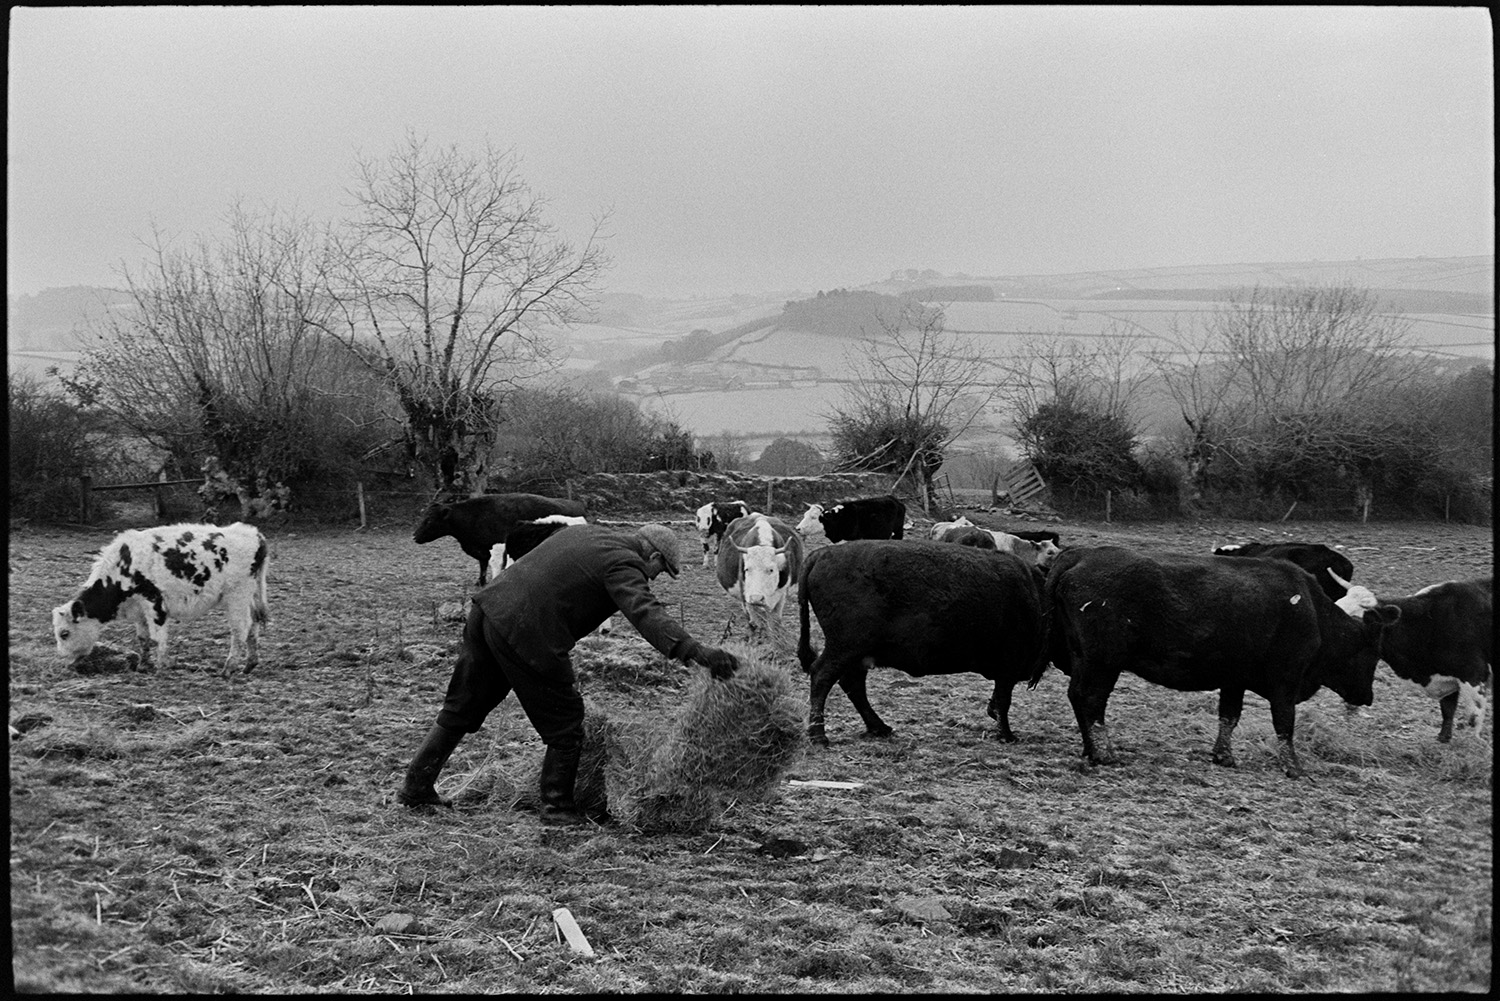 Farmer feeding hay to cattle.
[George Ayre spreading out hay for cattle in a field at Ashwell, Dolton. Misty hills are visible in the distance.]